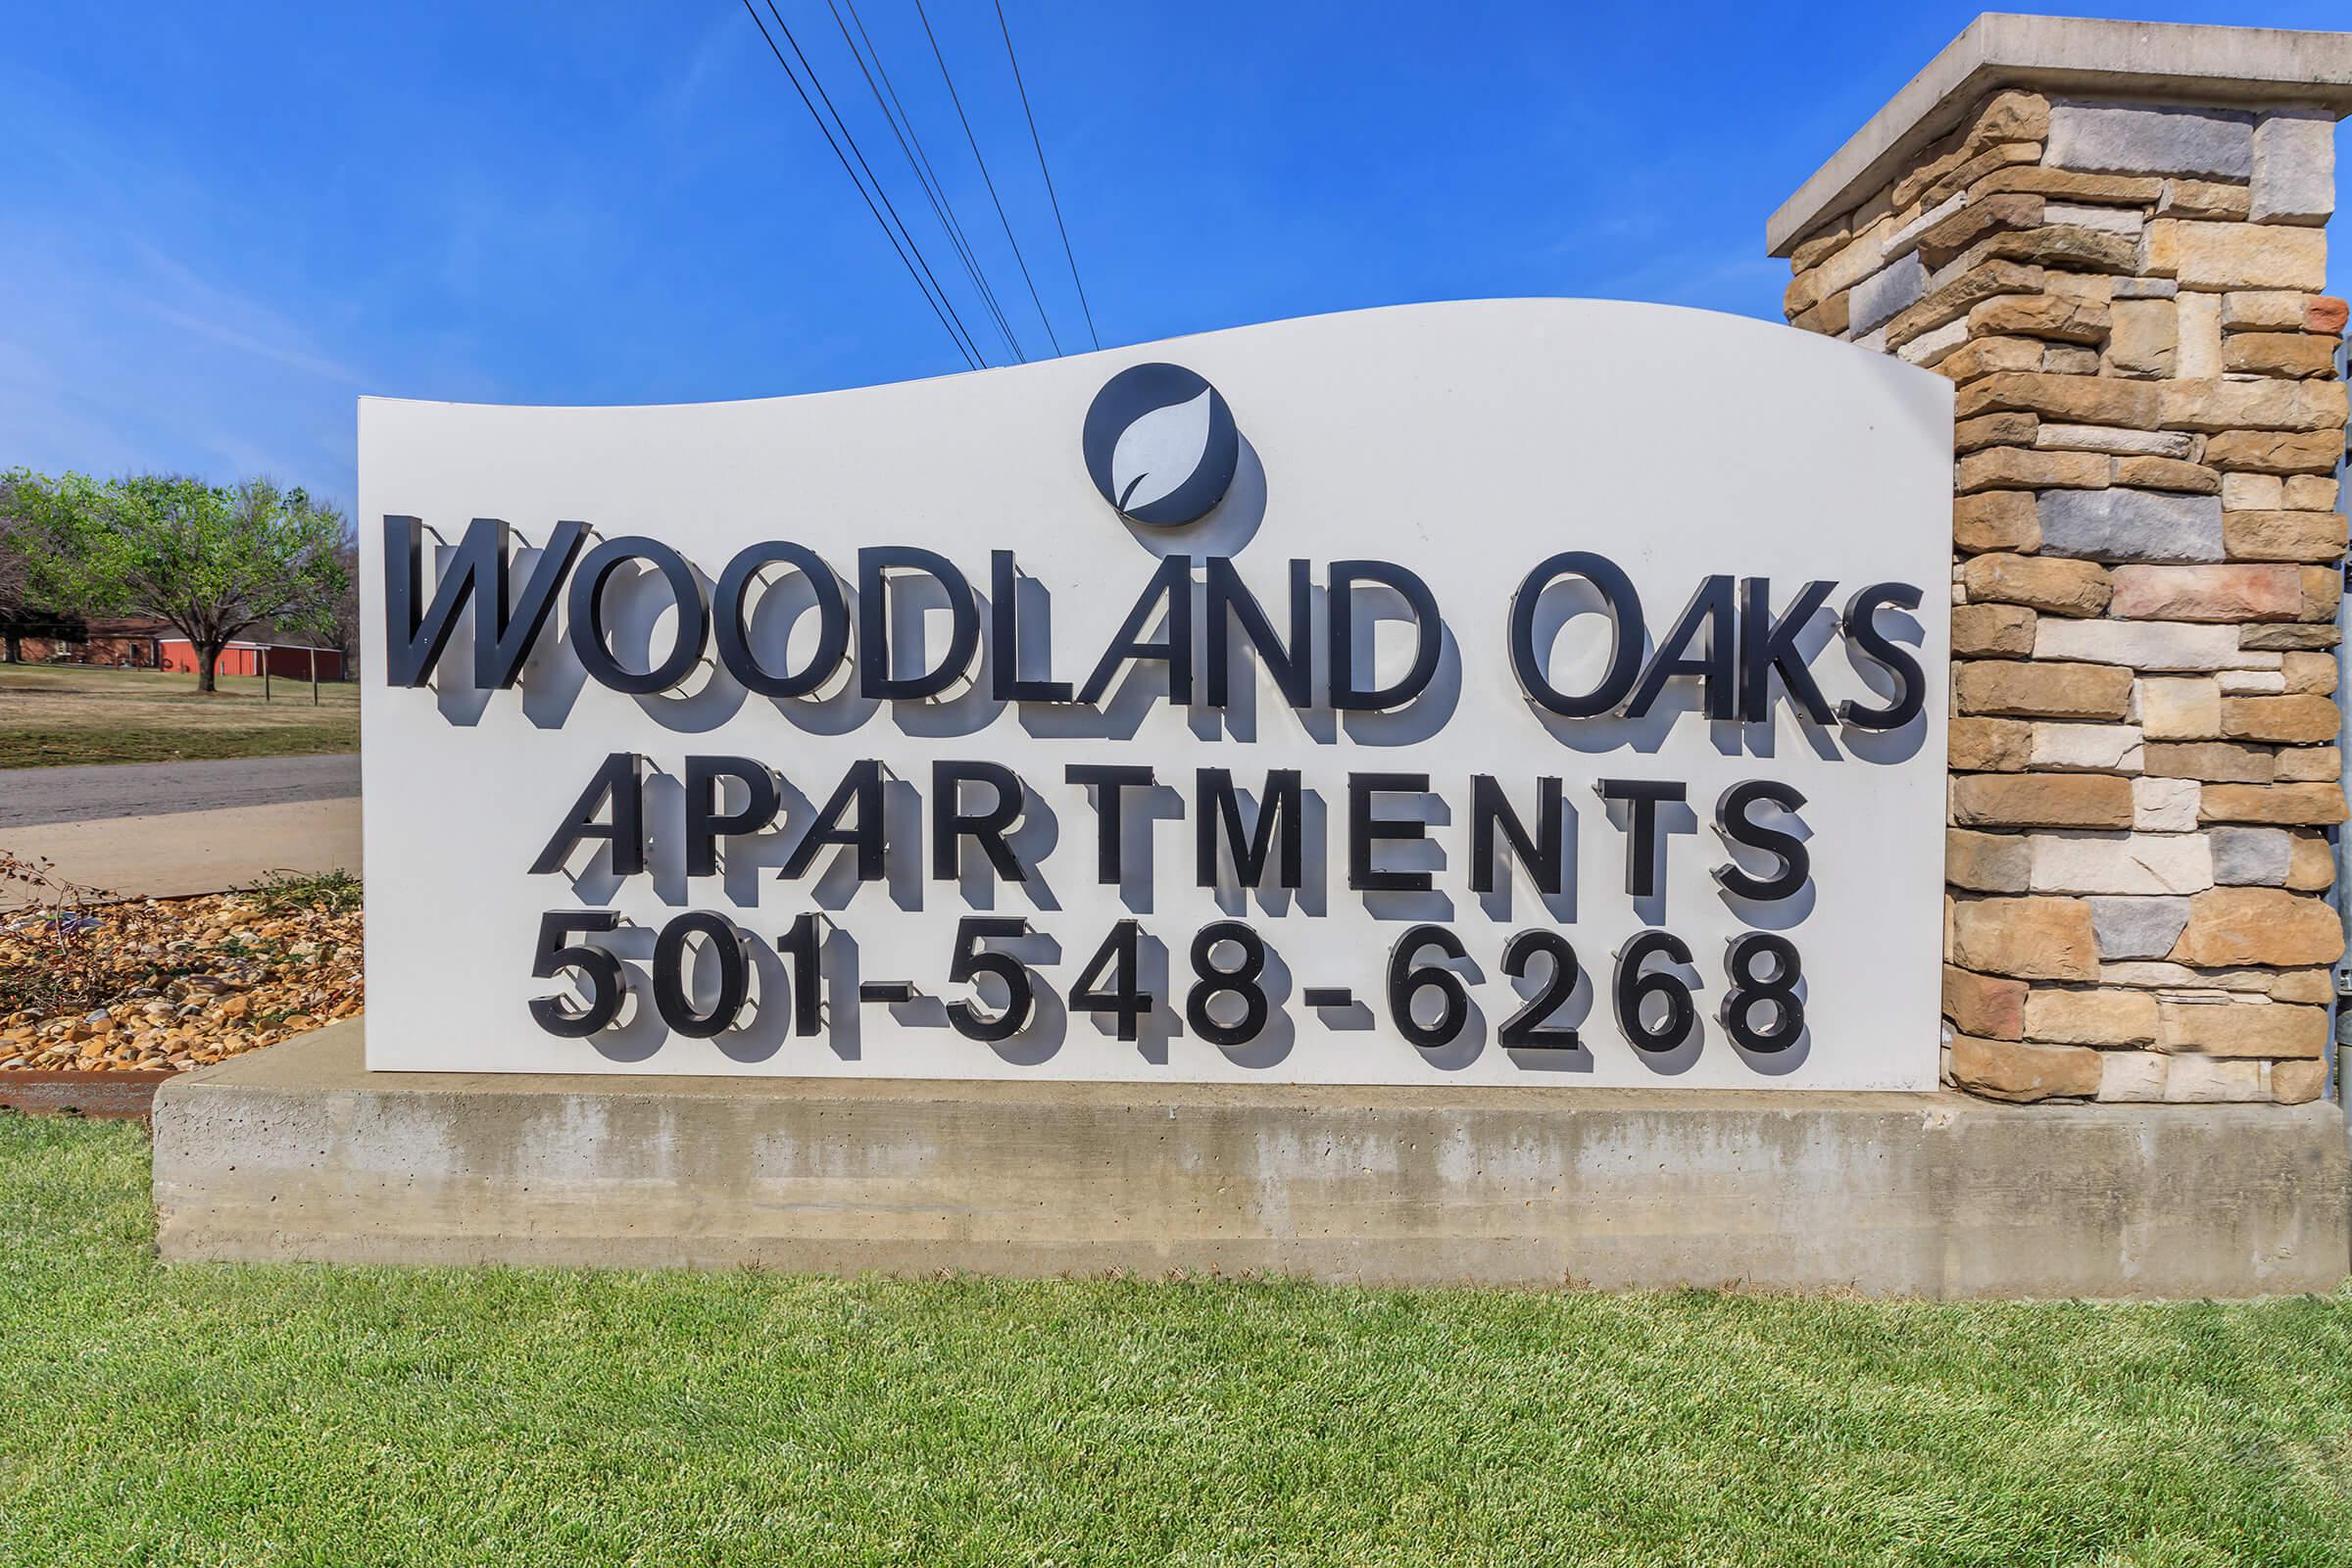 CONTACT  WOODLAND OAKS IN CONWAY, ARKANSAS